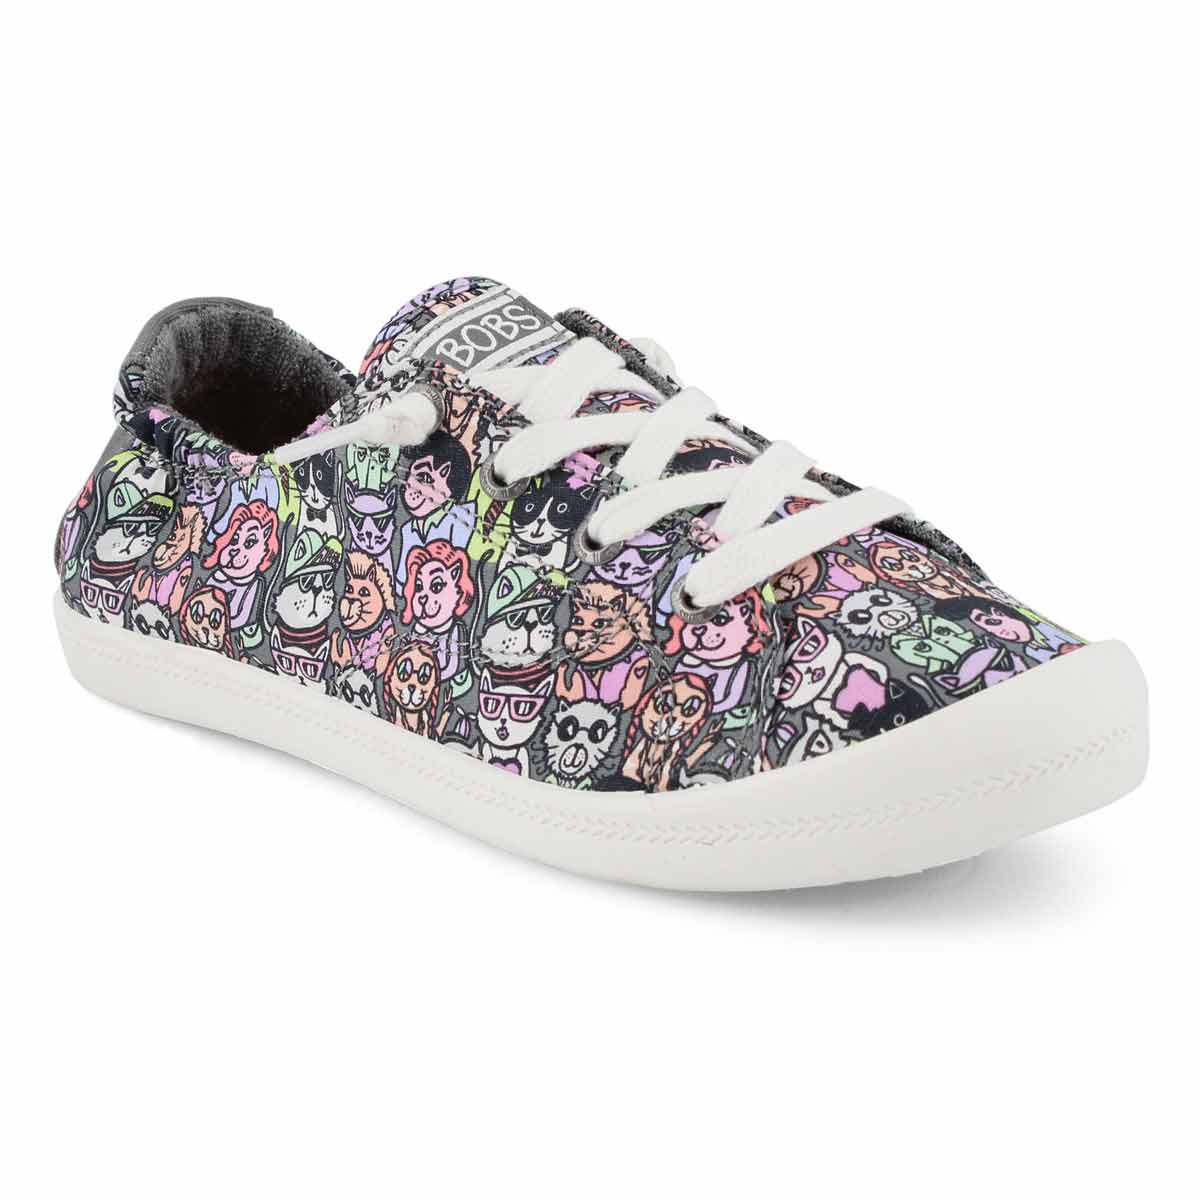 bobs cat shoes by skechers